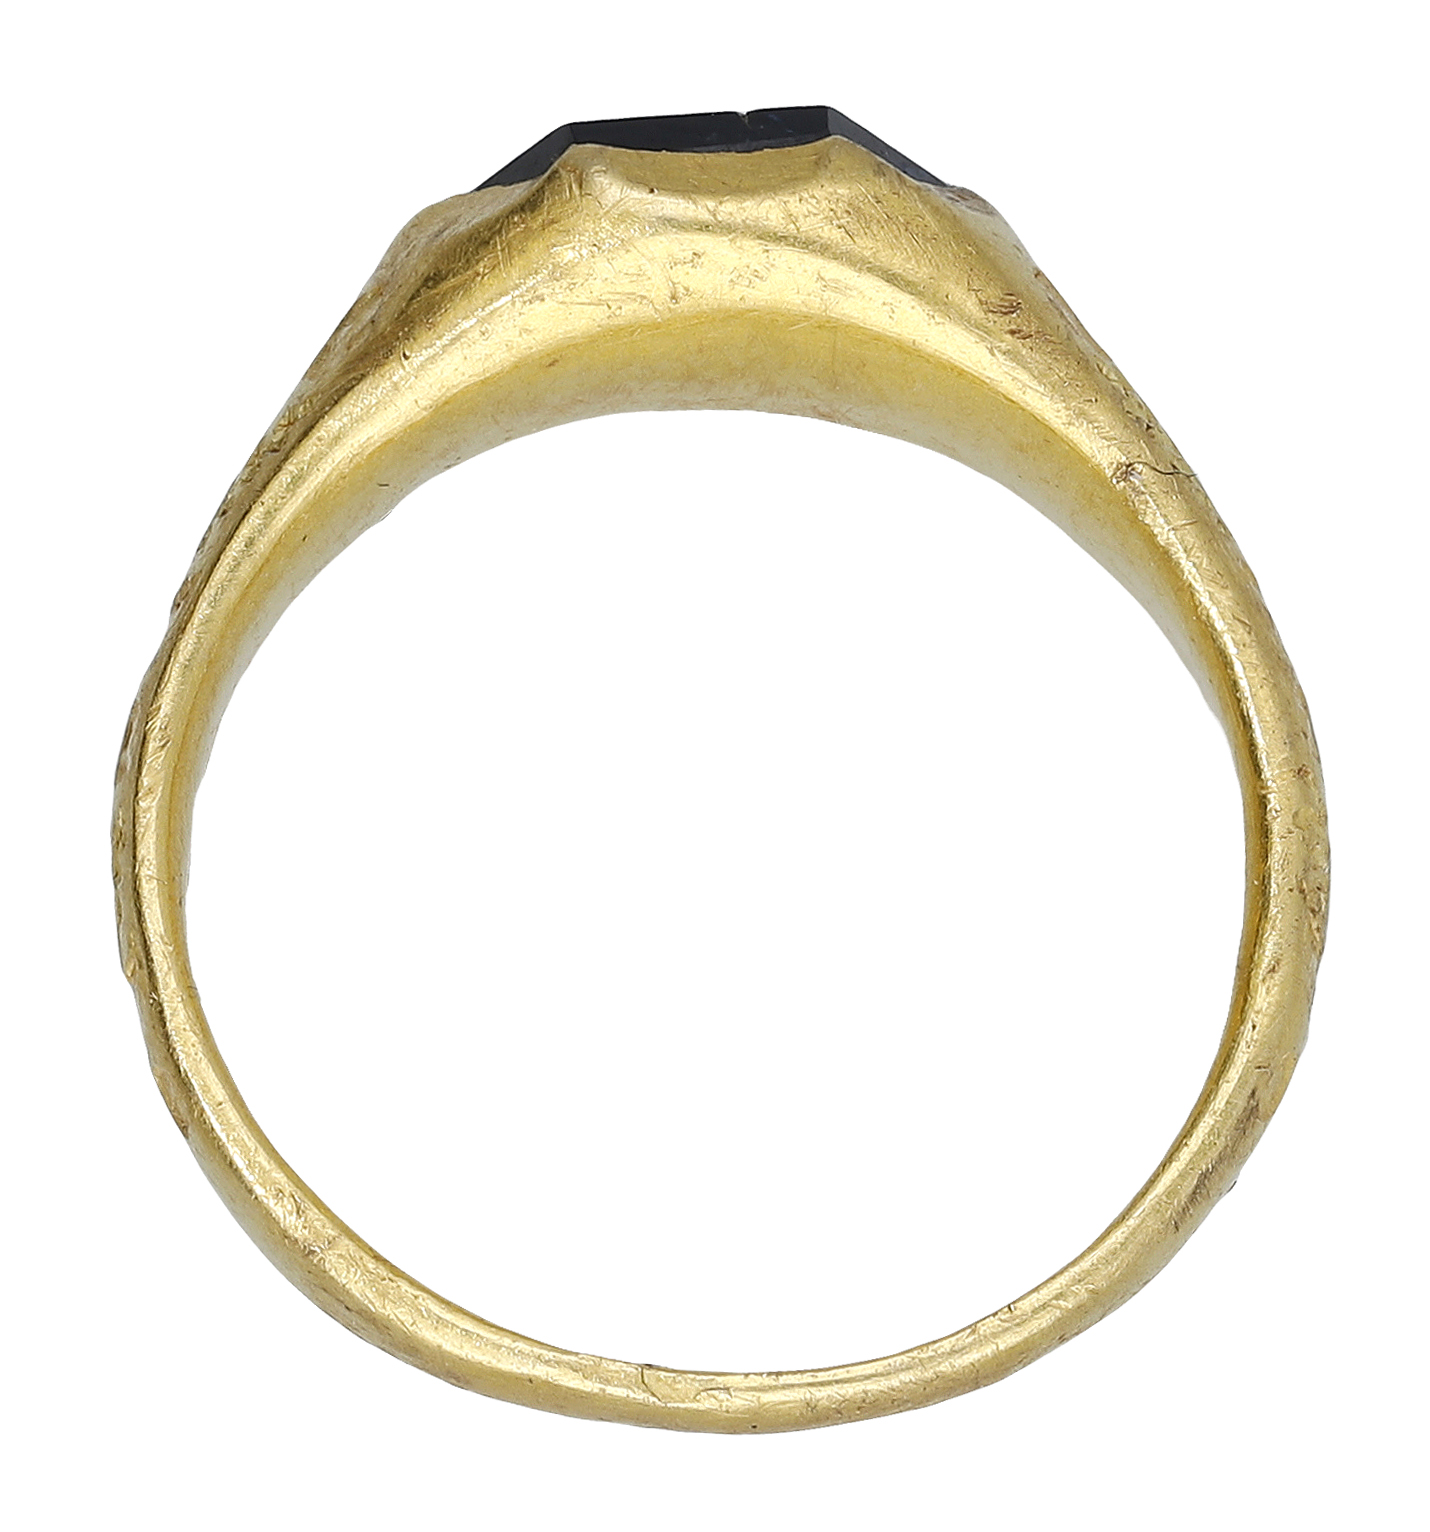 The Tarrant Abbey Ring - Image 3 of 7